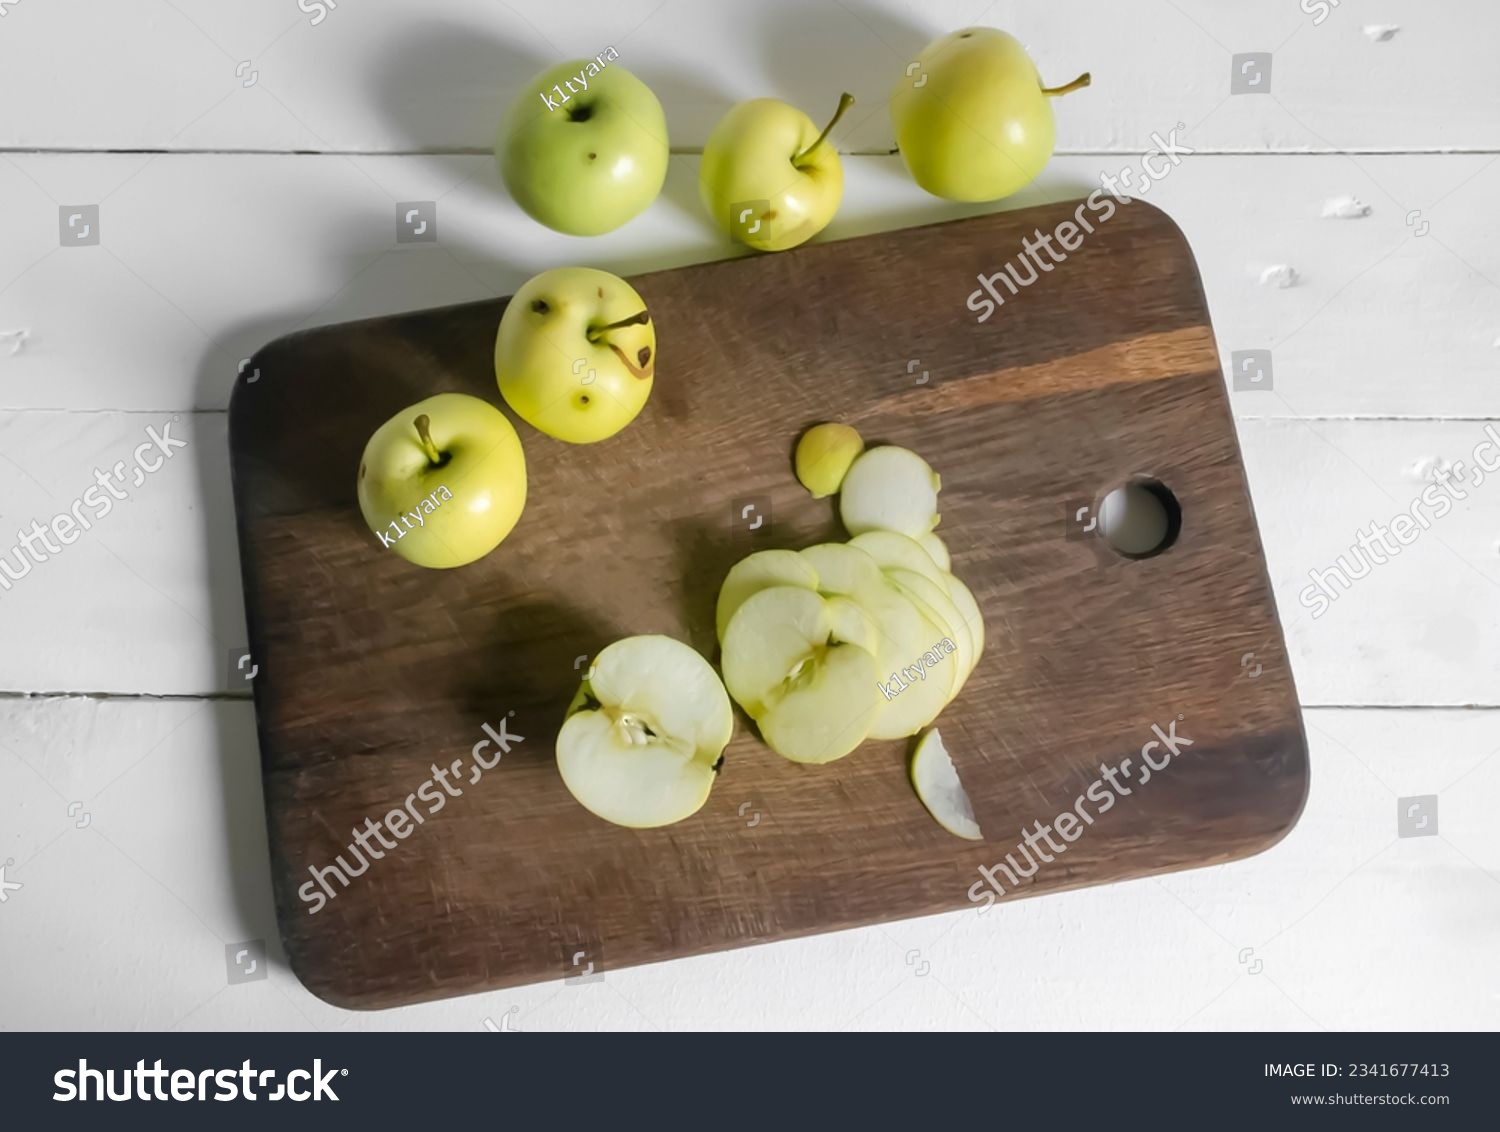 Processing of wormy apples. Spoiled apples with black dots - crop processing. Slicing an apple on a wooden board. #2341677413